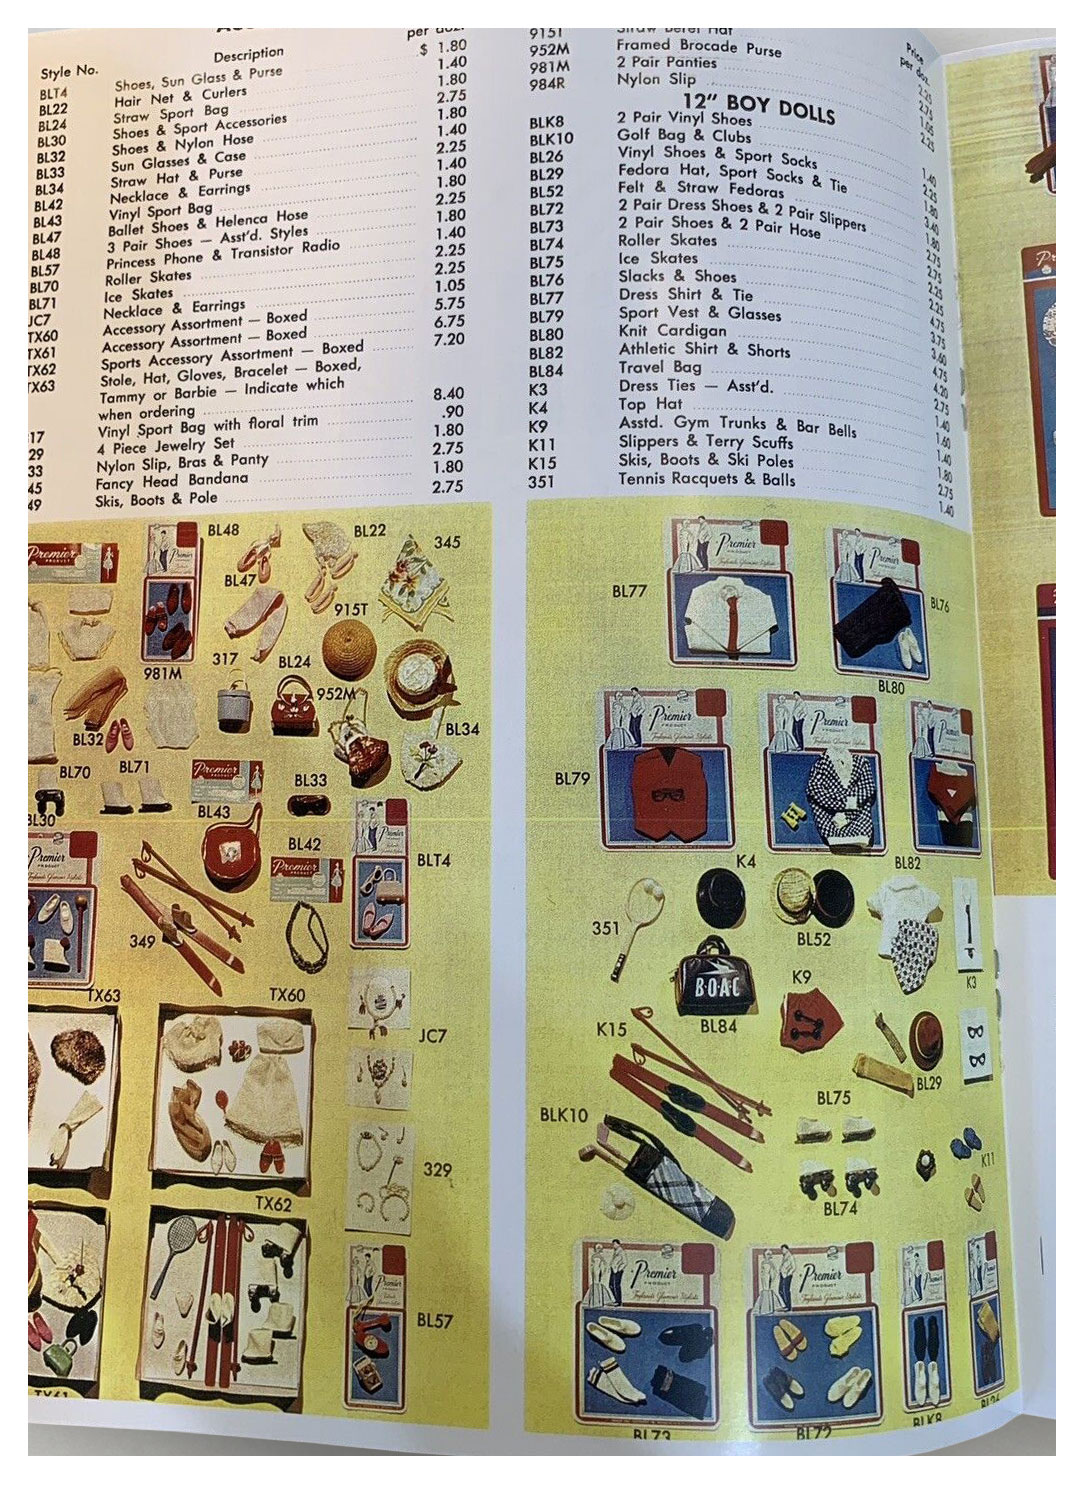 From 1964 Premier catalogue